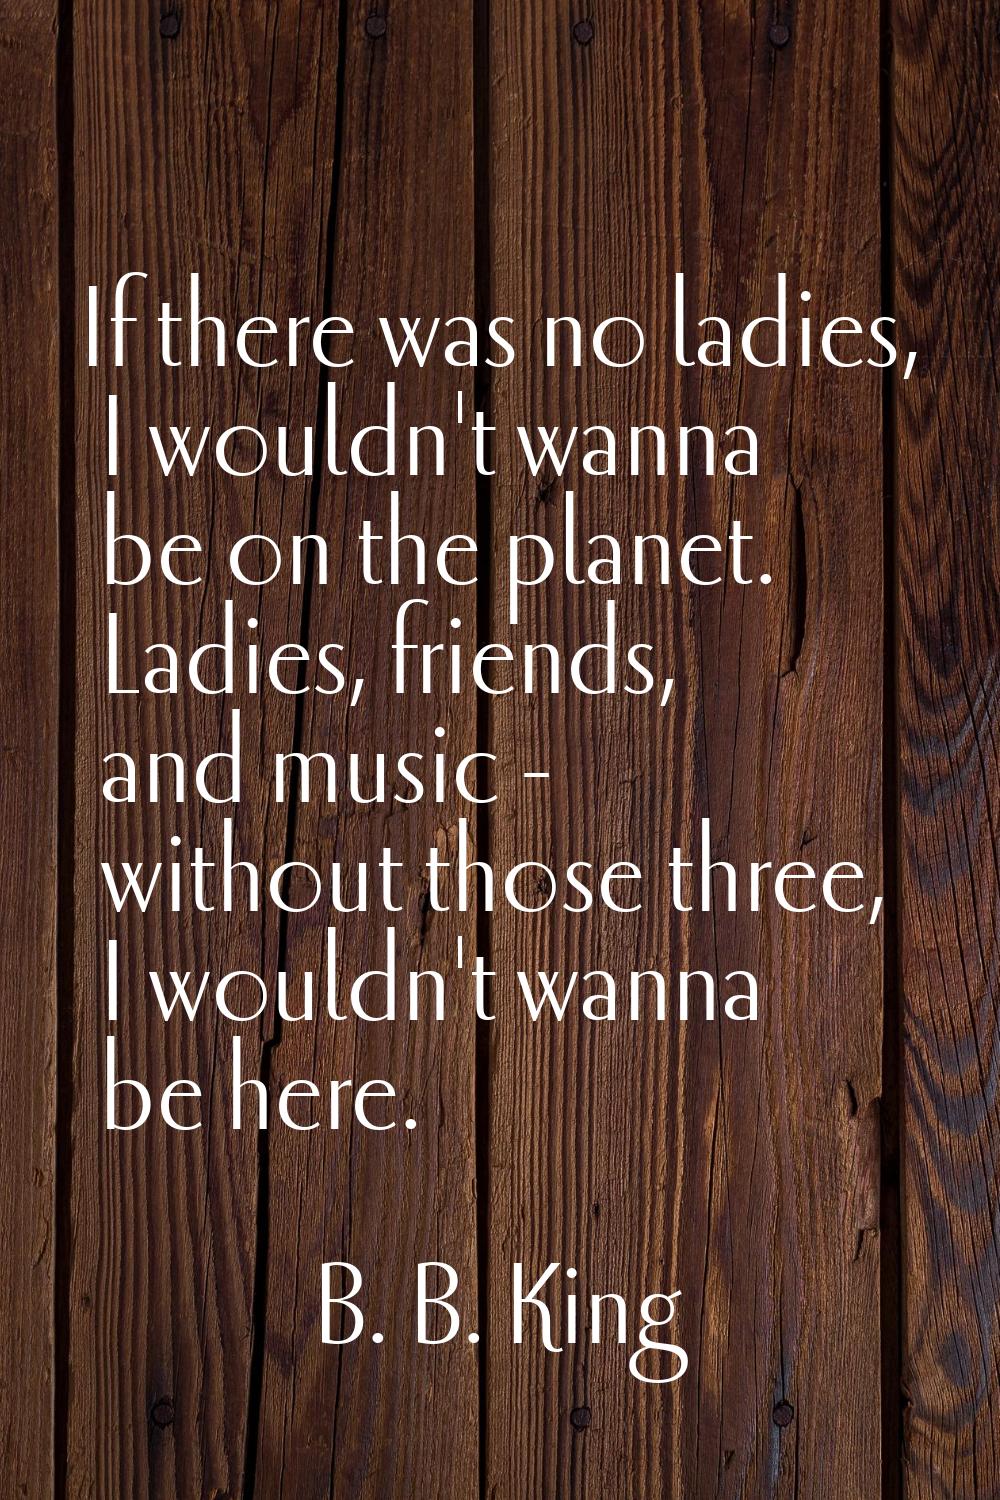 If there was no ladies, I wouldn't wanna be on the planet. Ladies, friends, and music - without tho